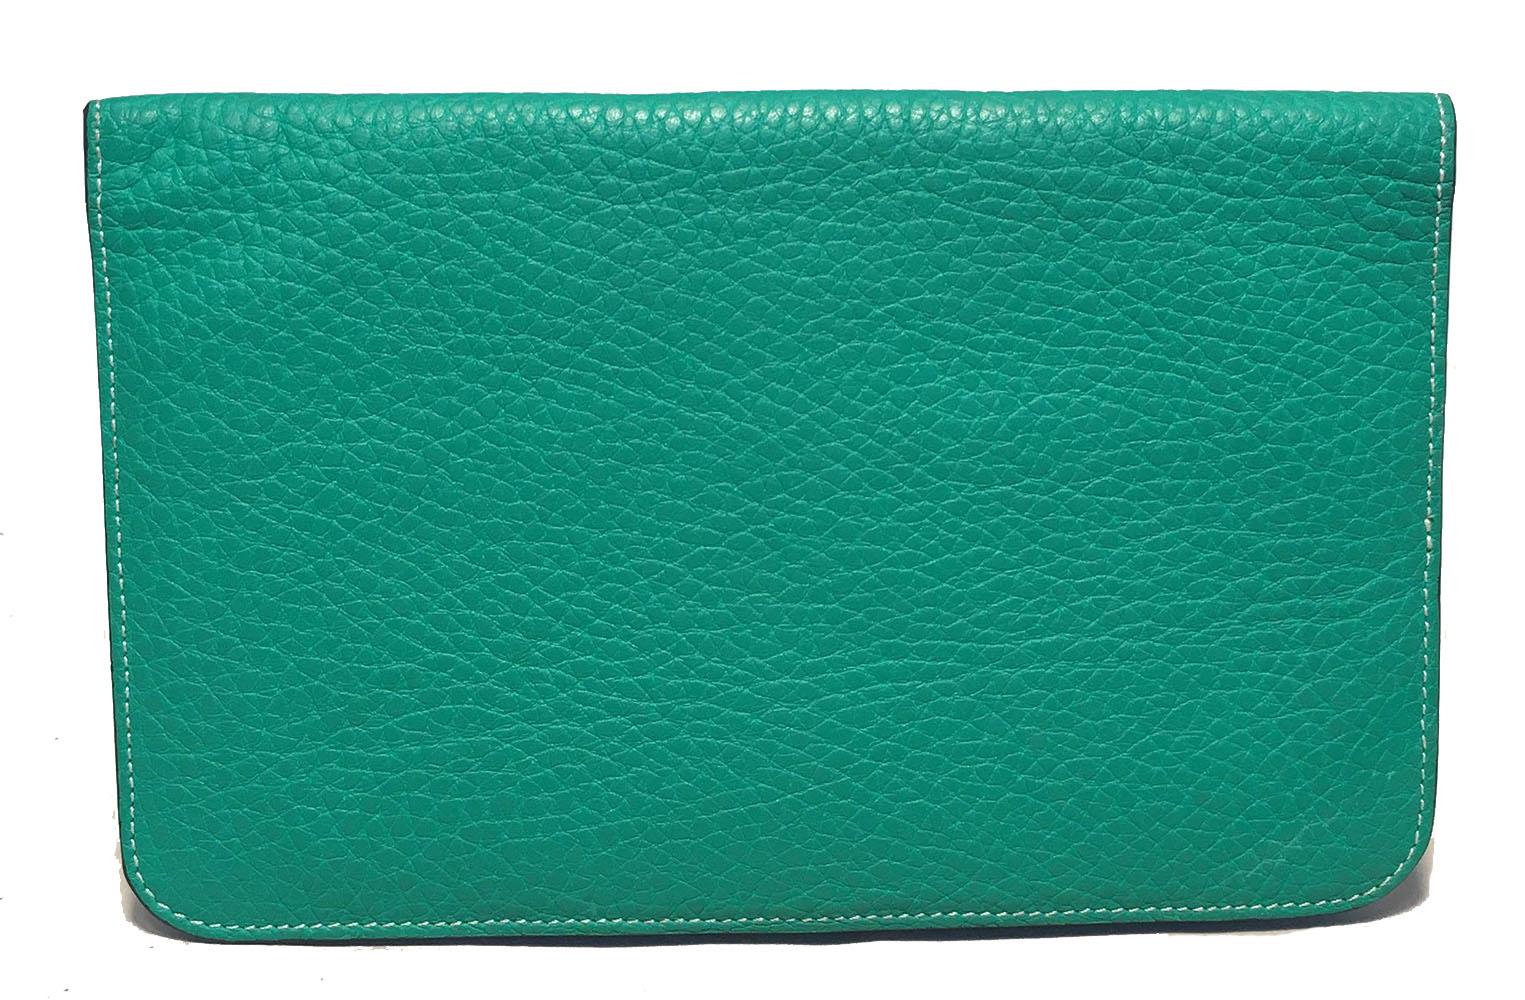 BEAUTIFUL Hermes Teal Jade Green Clemence Leather Dogon Wallet in excellent condition.  Jade green clemence leather exterior with silver palladium hardware. No interior pouch. Matching interior lining with 2 large slit pockets and 5 smaller card